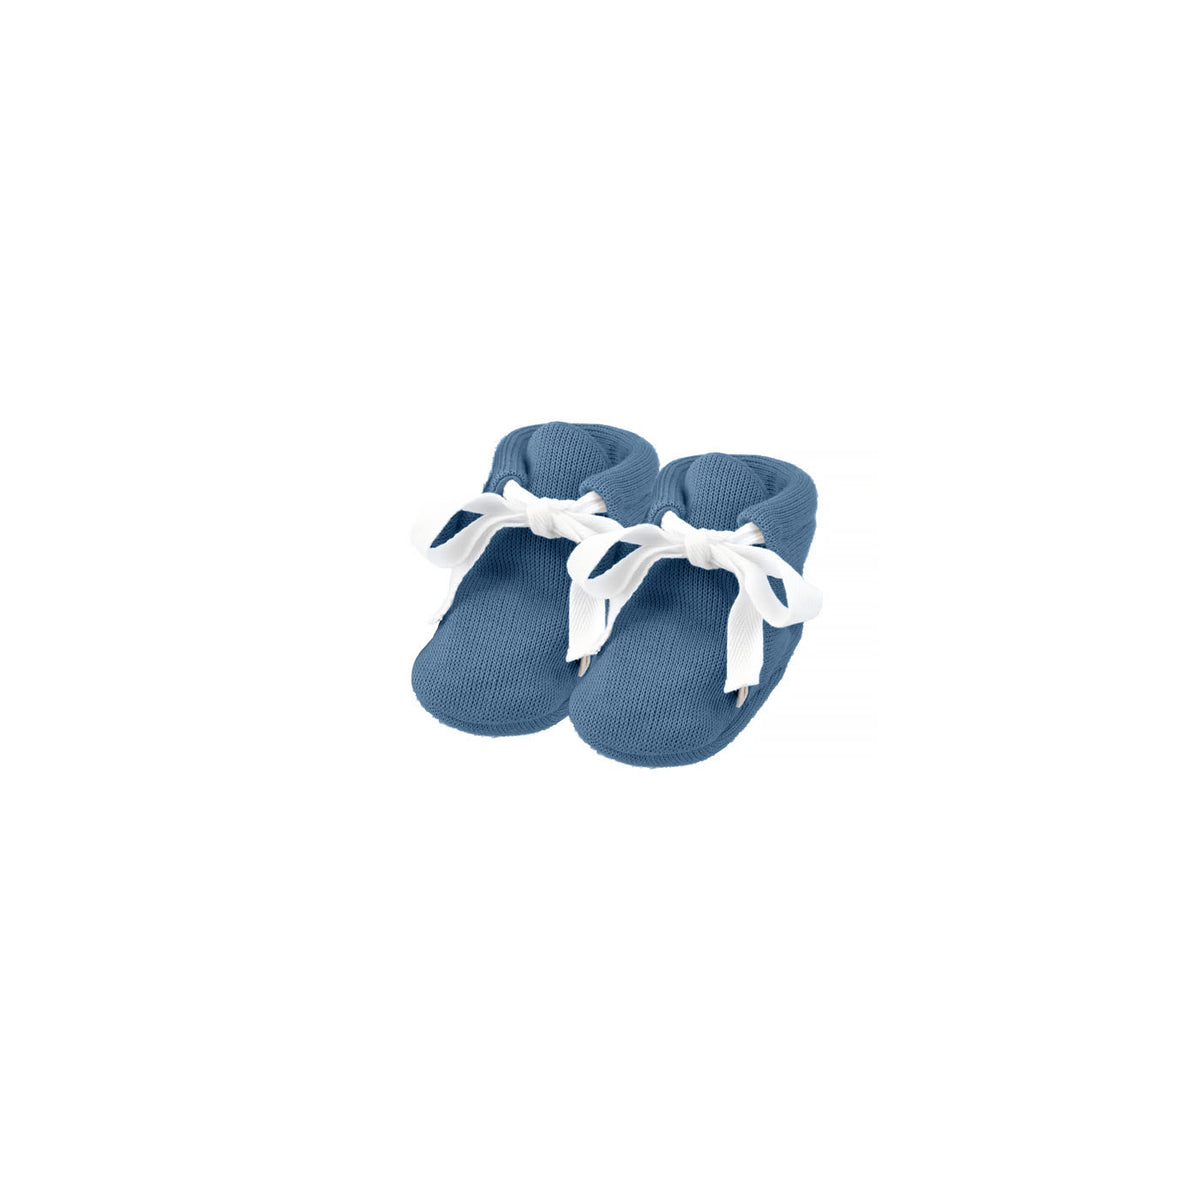 uaua baby booties in azul color with white ties